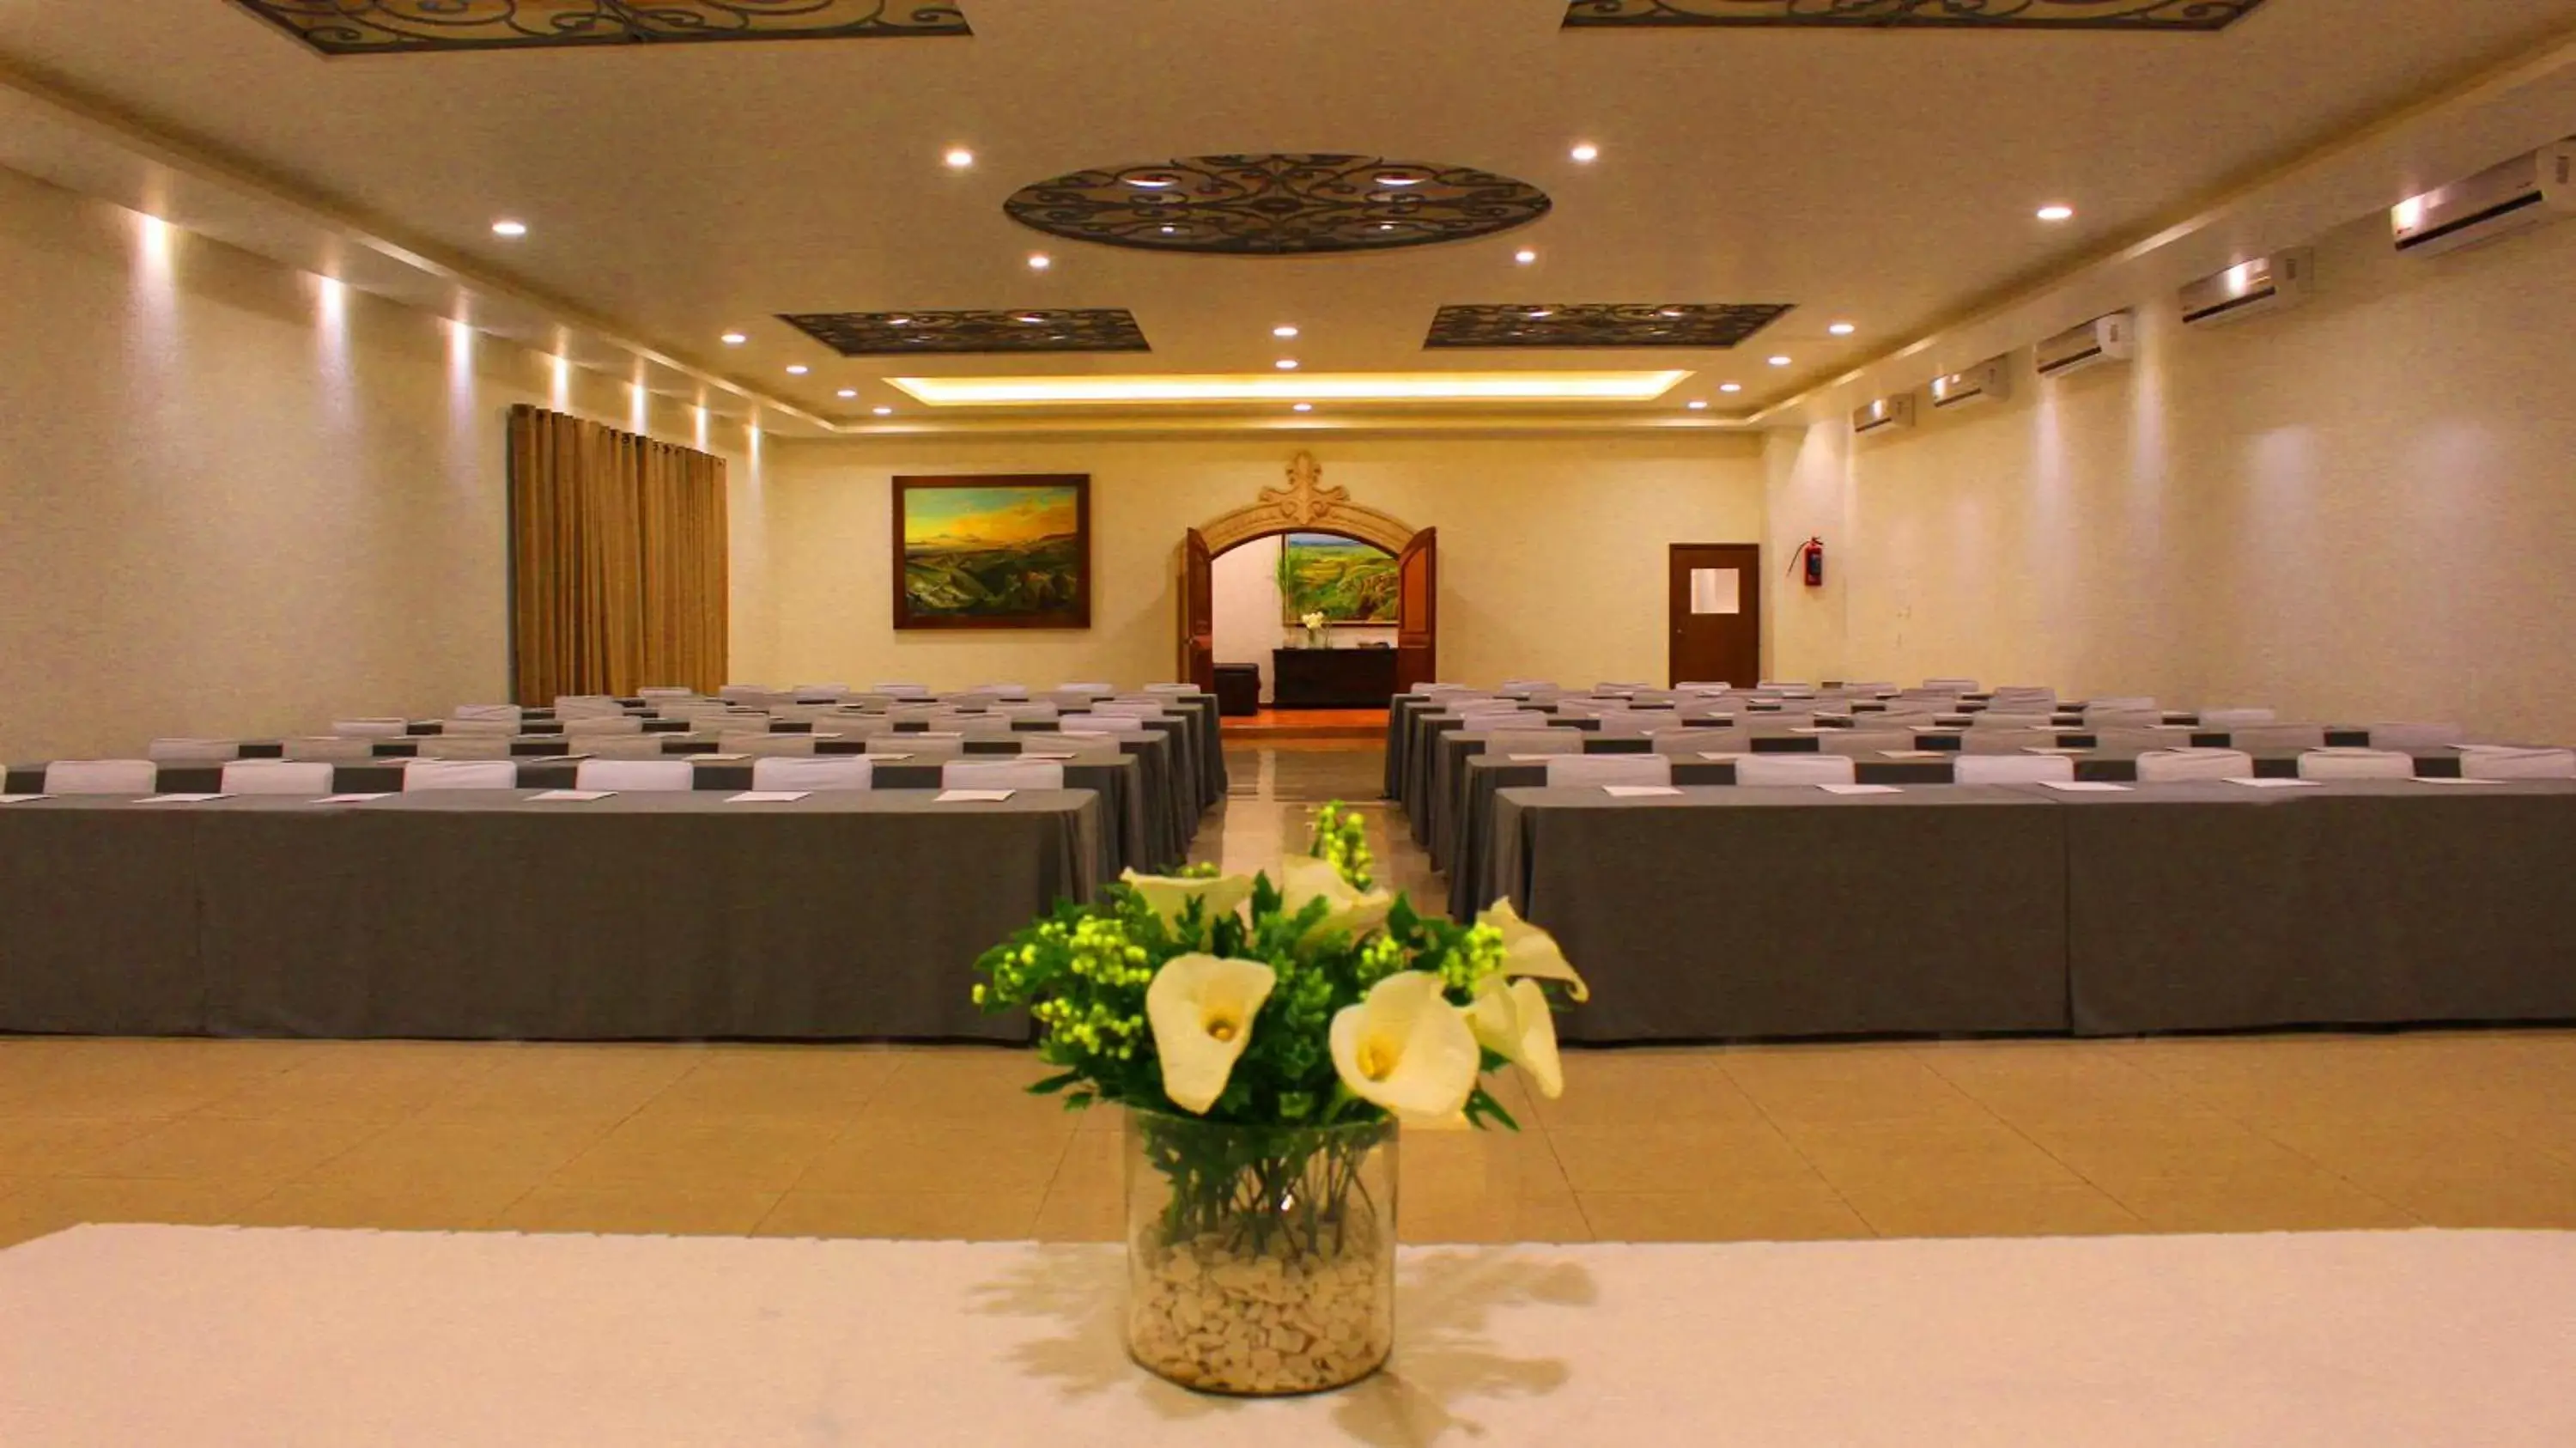 Meeting/conference room, Banquet Facilities in Meson del Valle